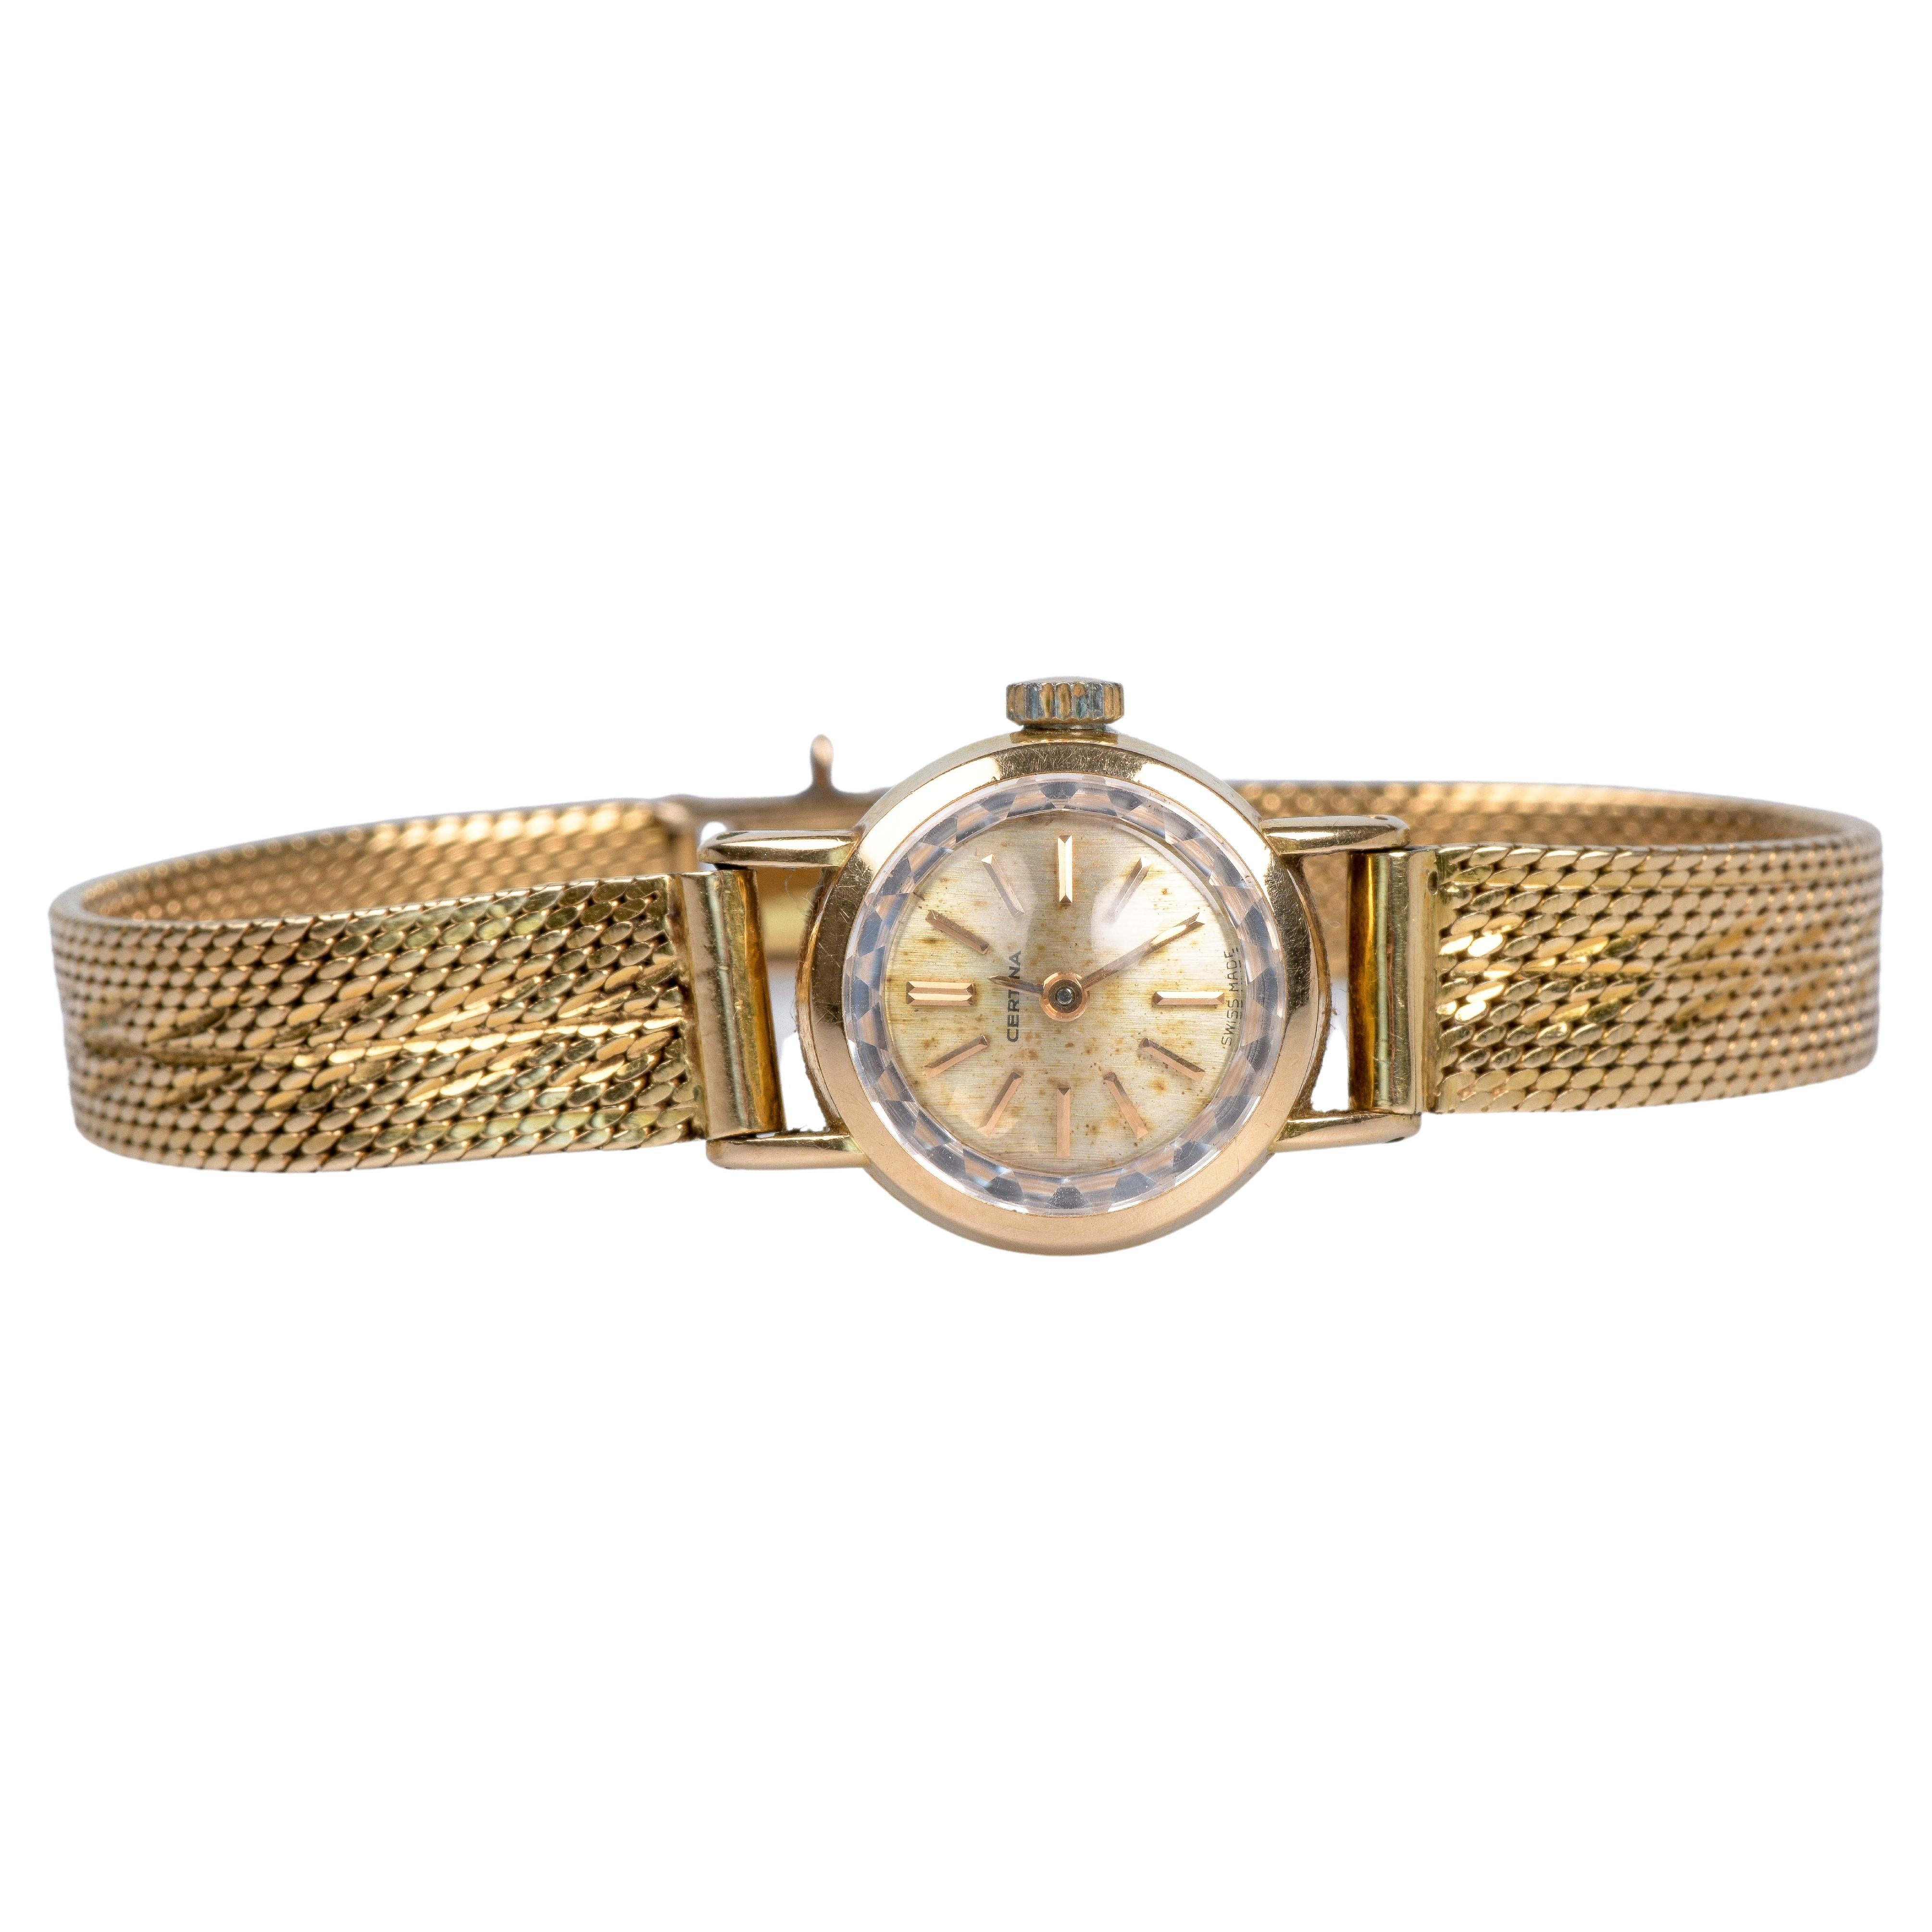 CERTINA's watch in 18carats yellow gold with a soft decorated fine mesh bracelet